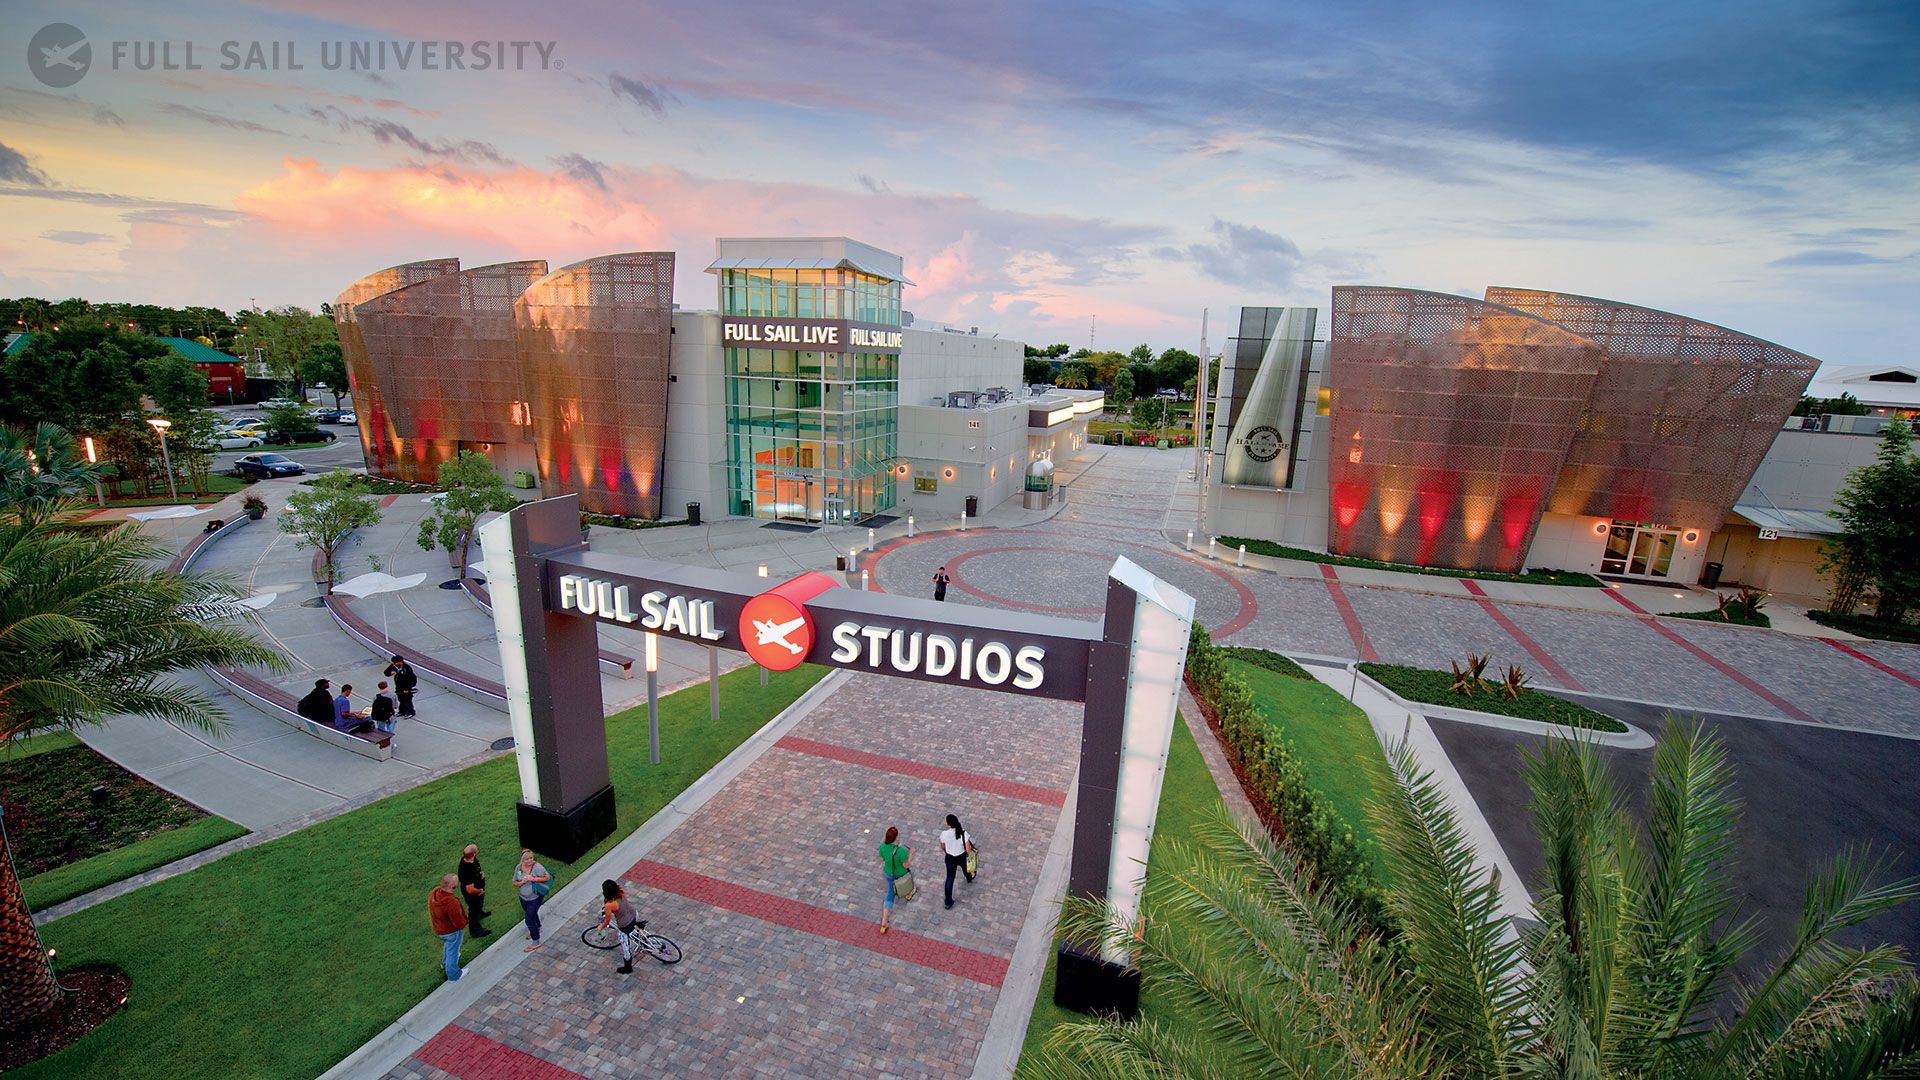 Transfer Event presented by Full Sail University